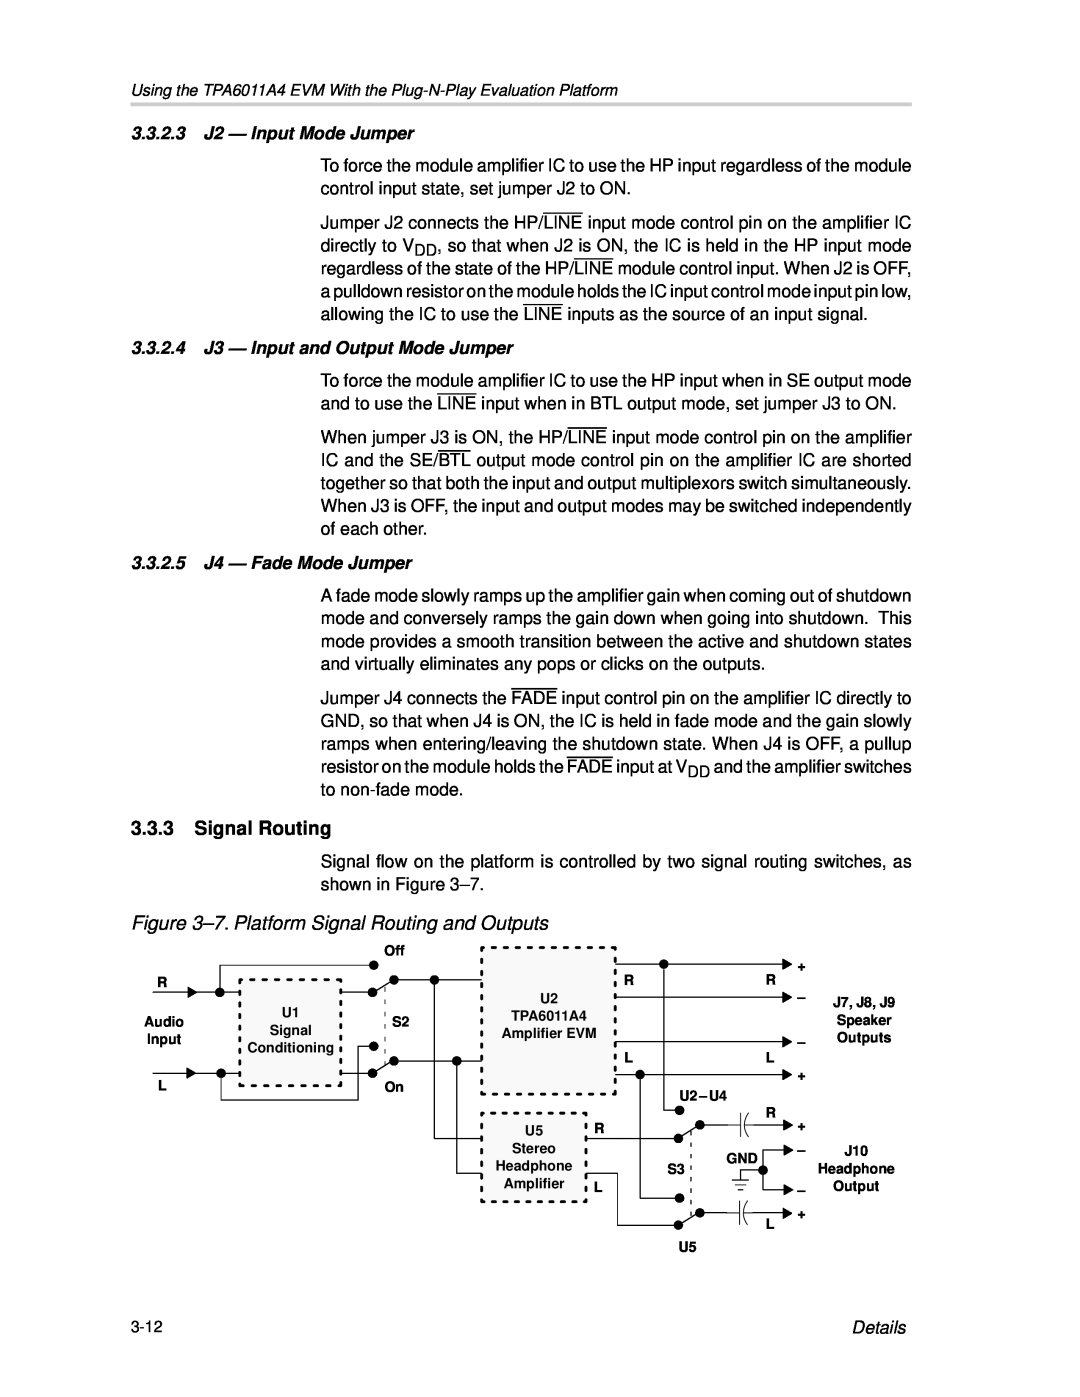 Texas Instruments SLOU121 manual 3.3.3Signal Routing, 7.Platform Signal Routing and Outputs 